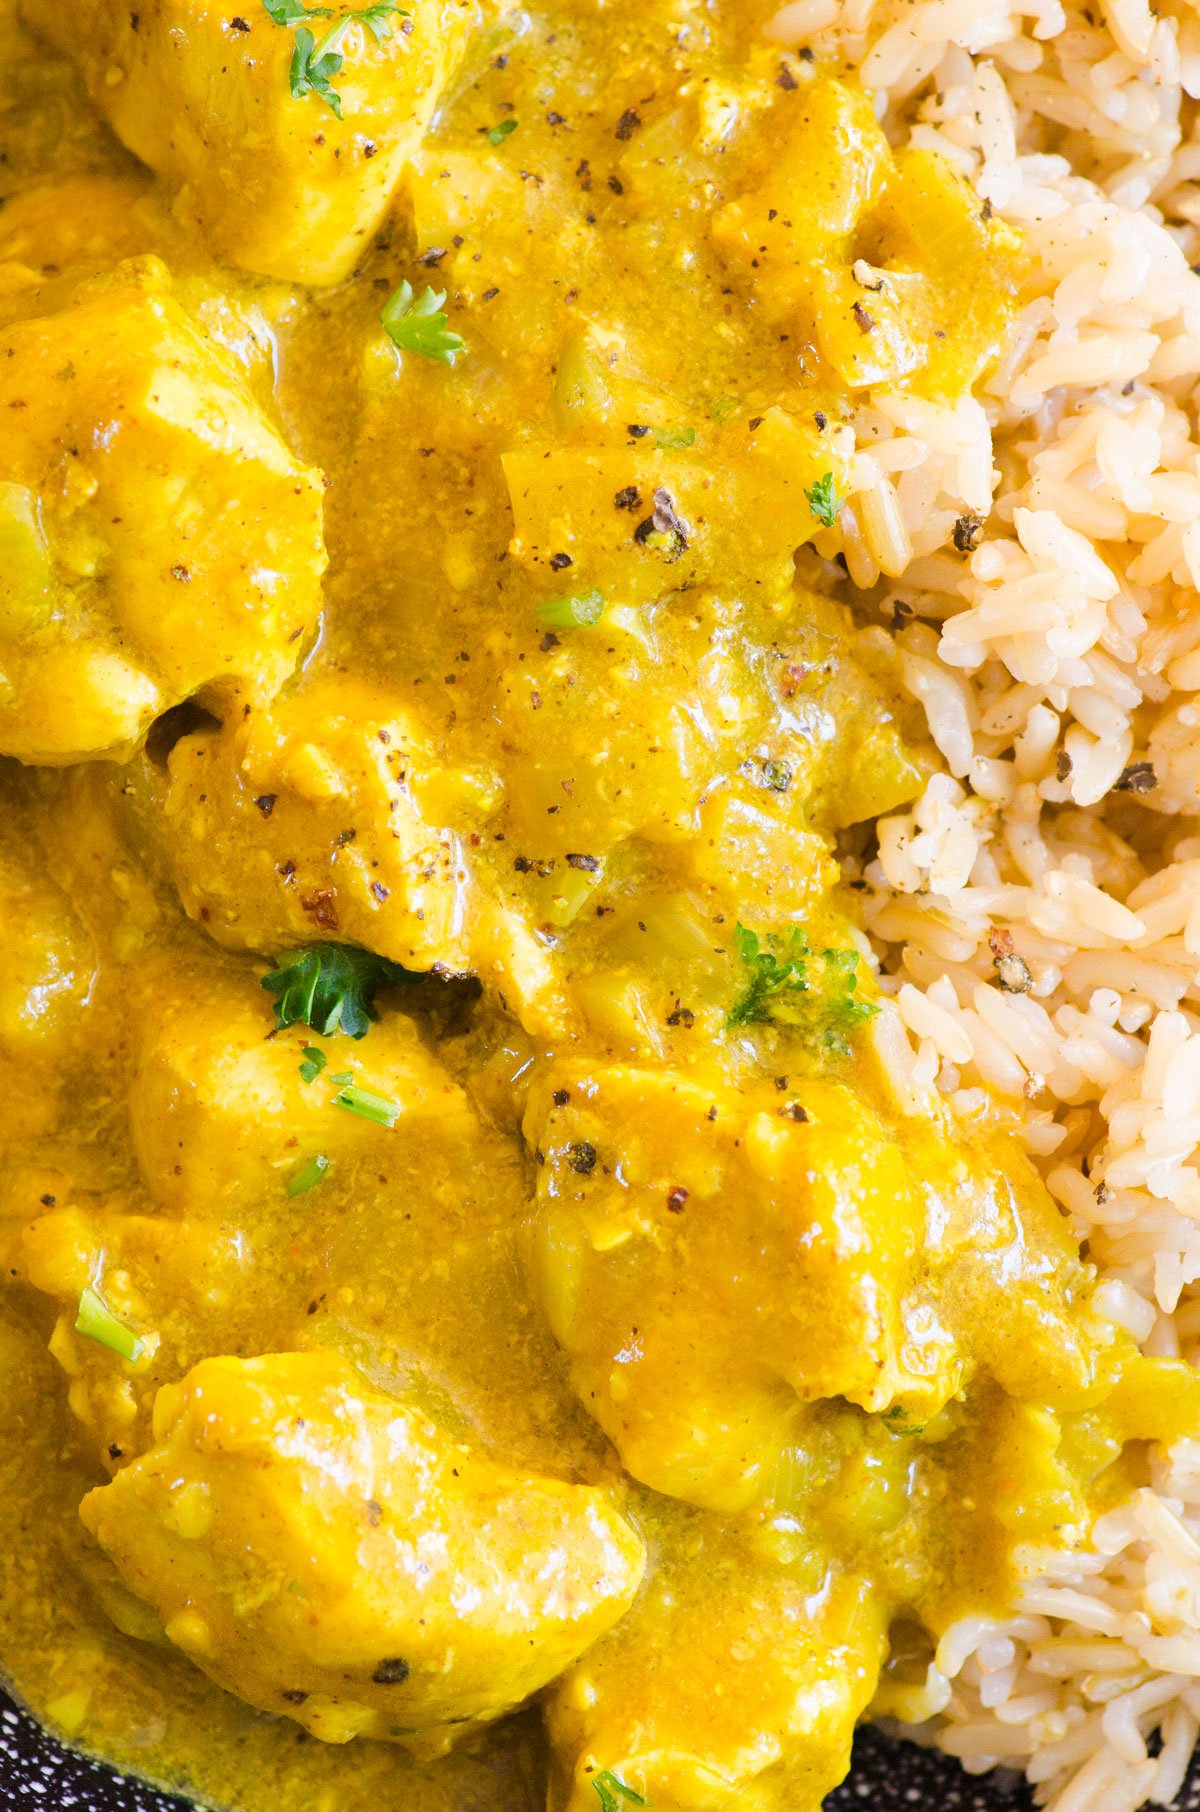 Yellow chicken curry with rice and cilantro and black pepper garnish.